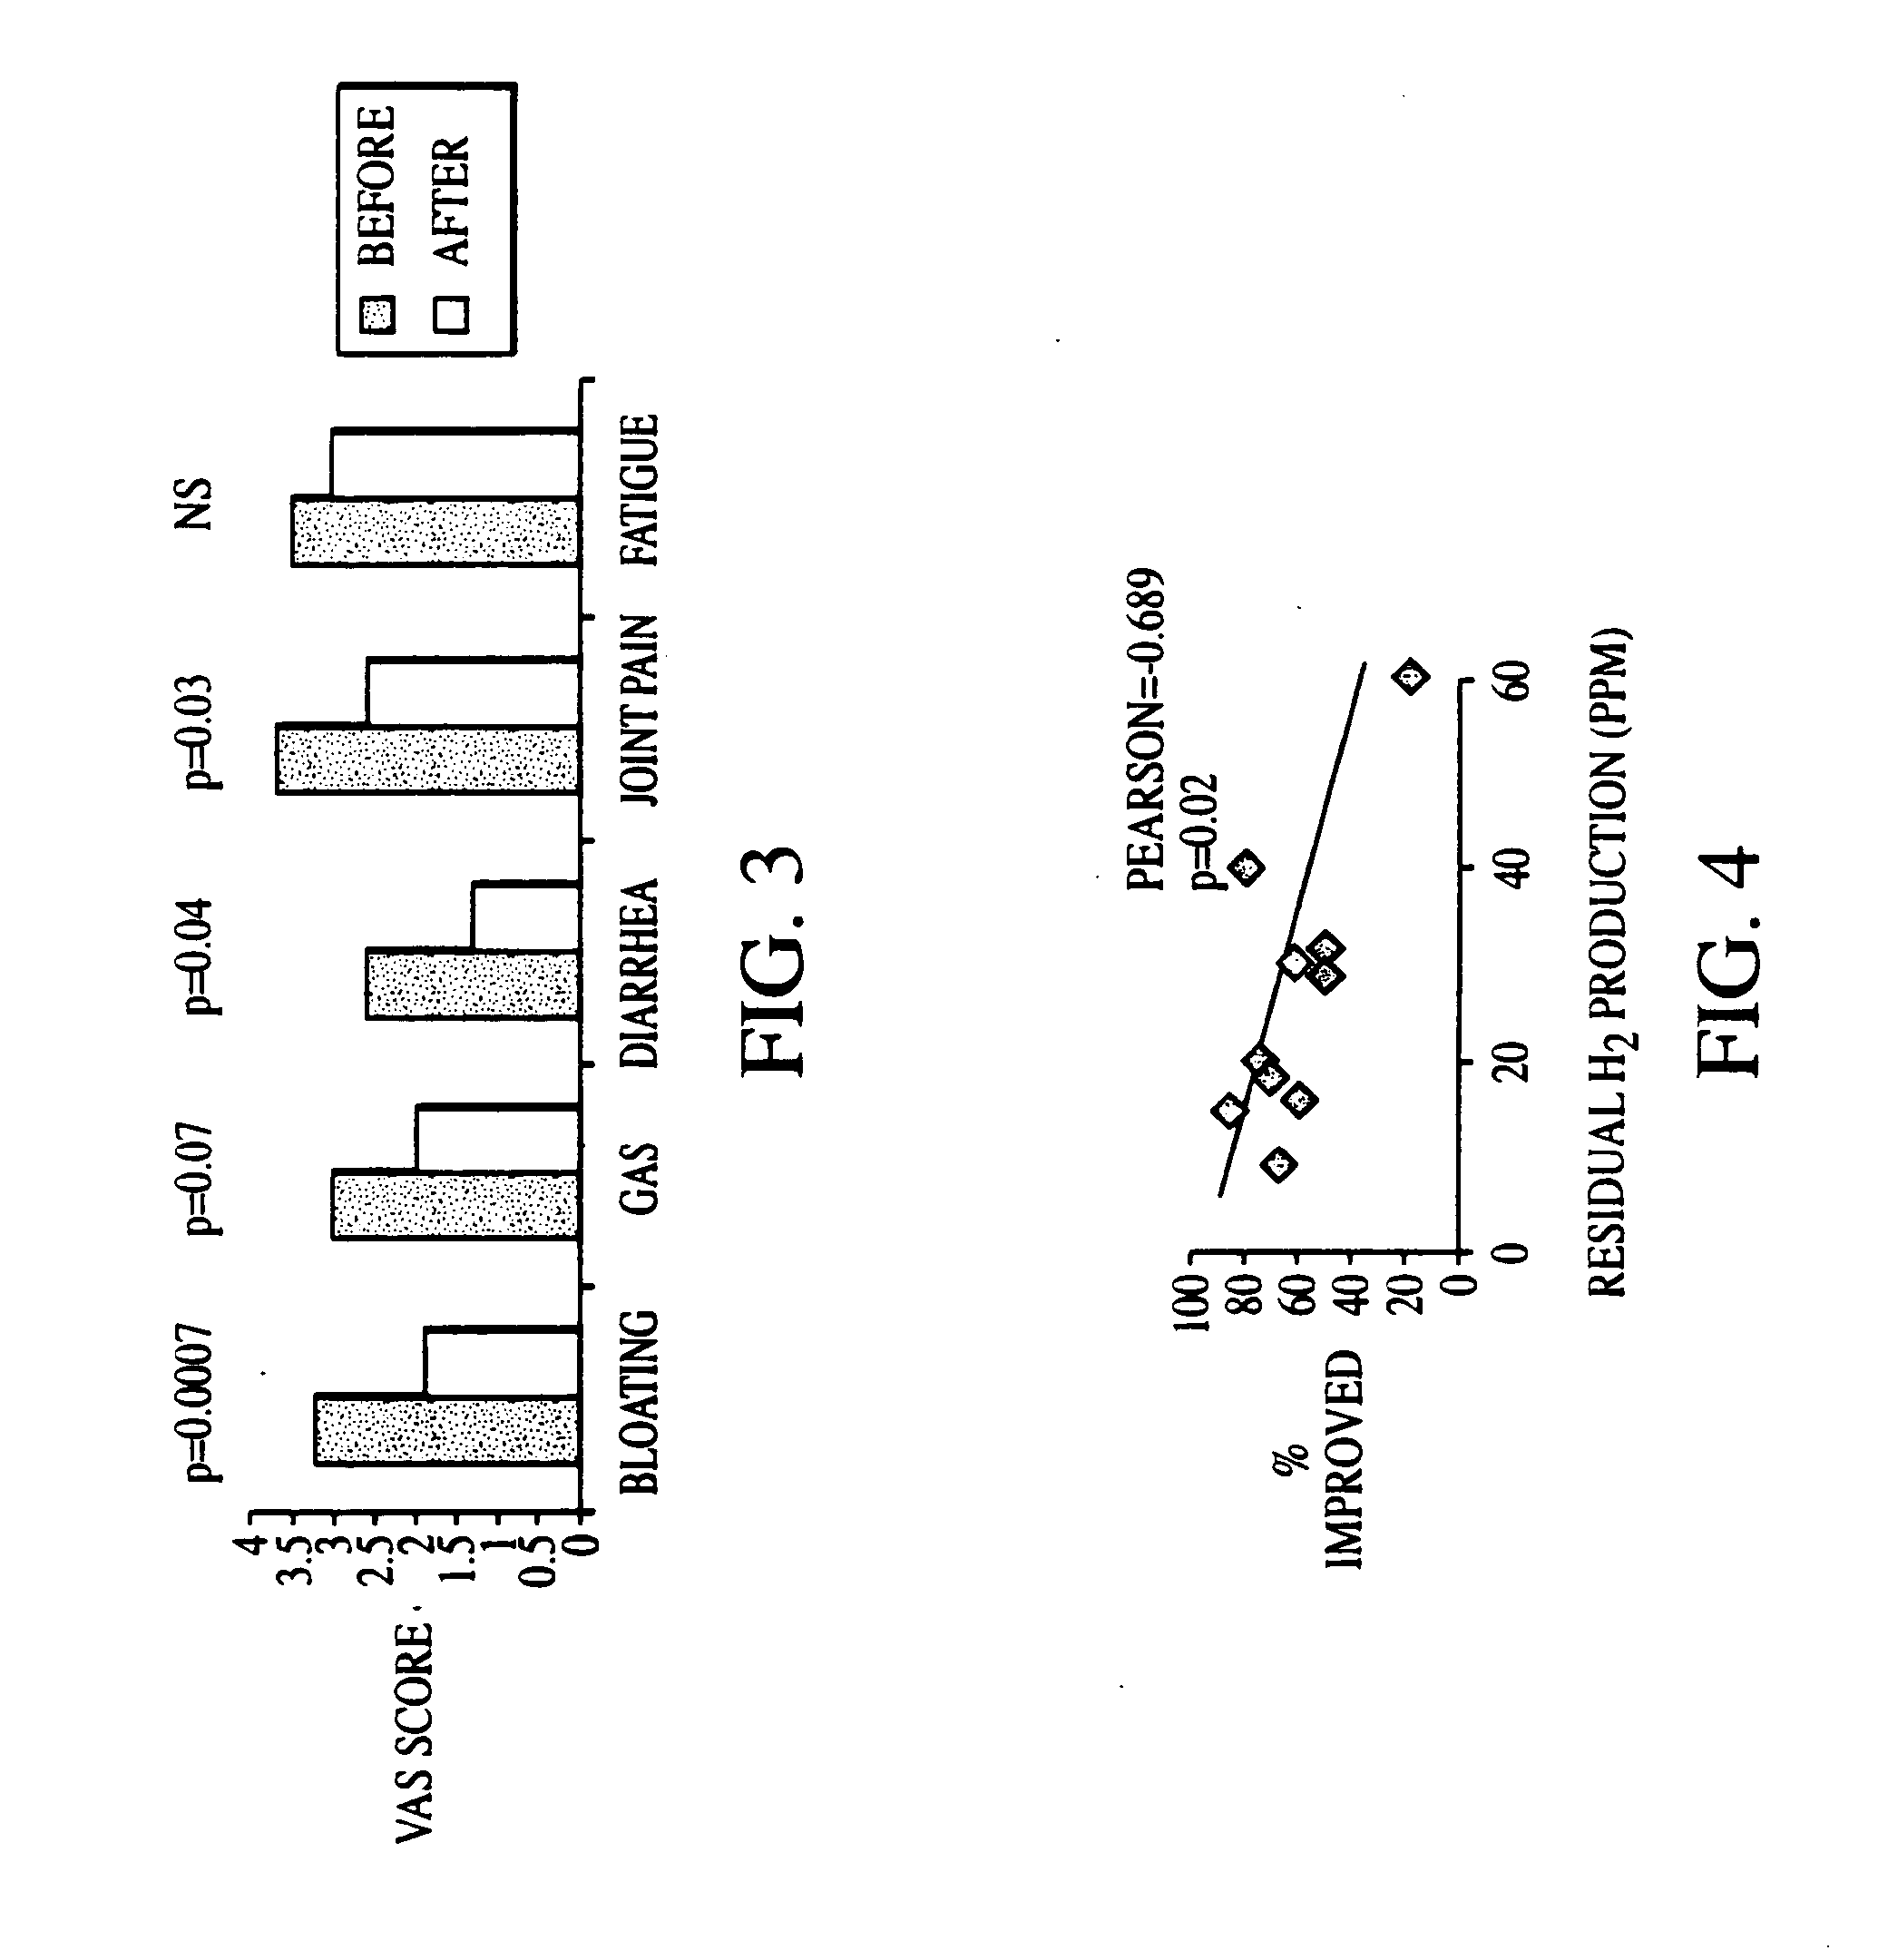 Method of diagnosing irritable bowel syndrome and other disorders caused by small intestinal bacterial overgrowth